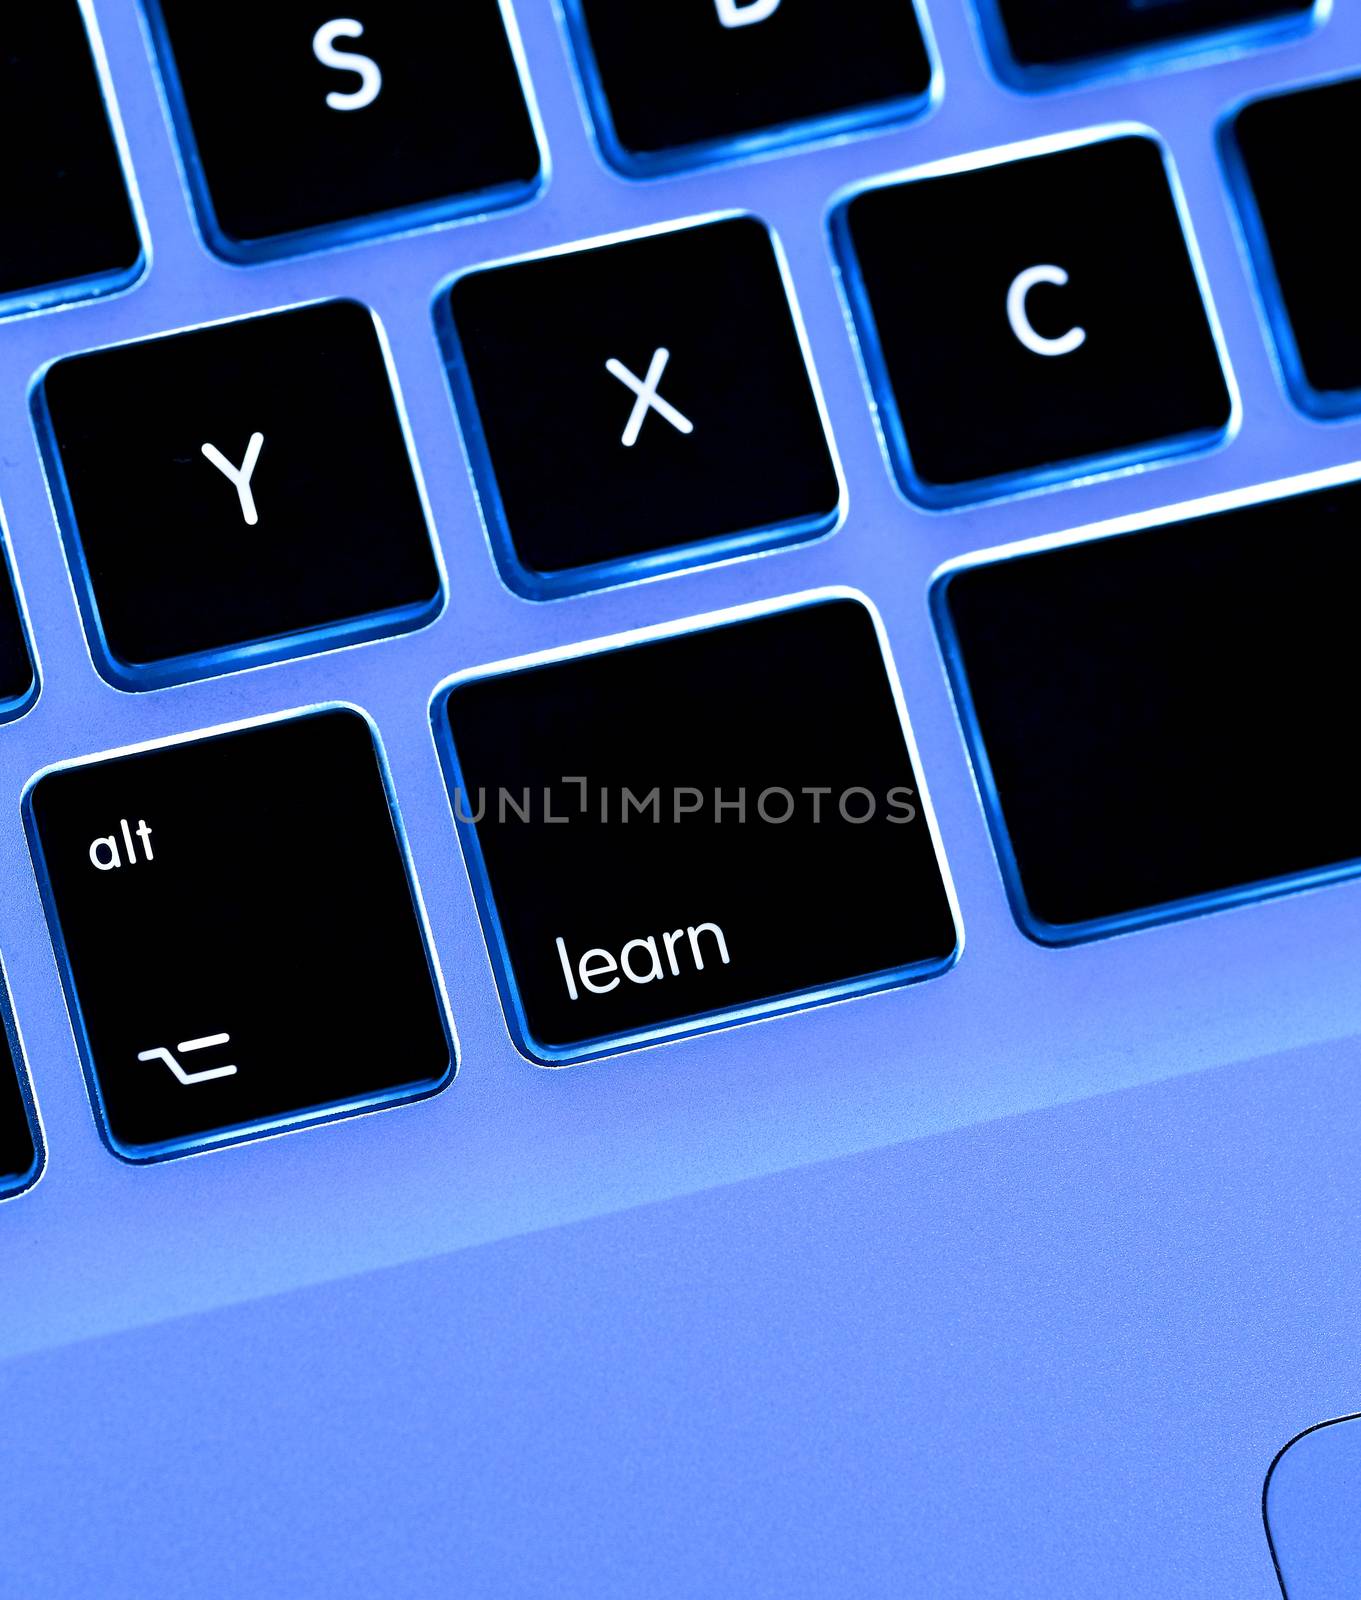 keyboard layout with "learn" key / button {super high resolution/shot with PhaseOne P45}